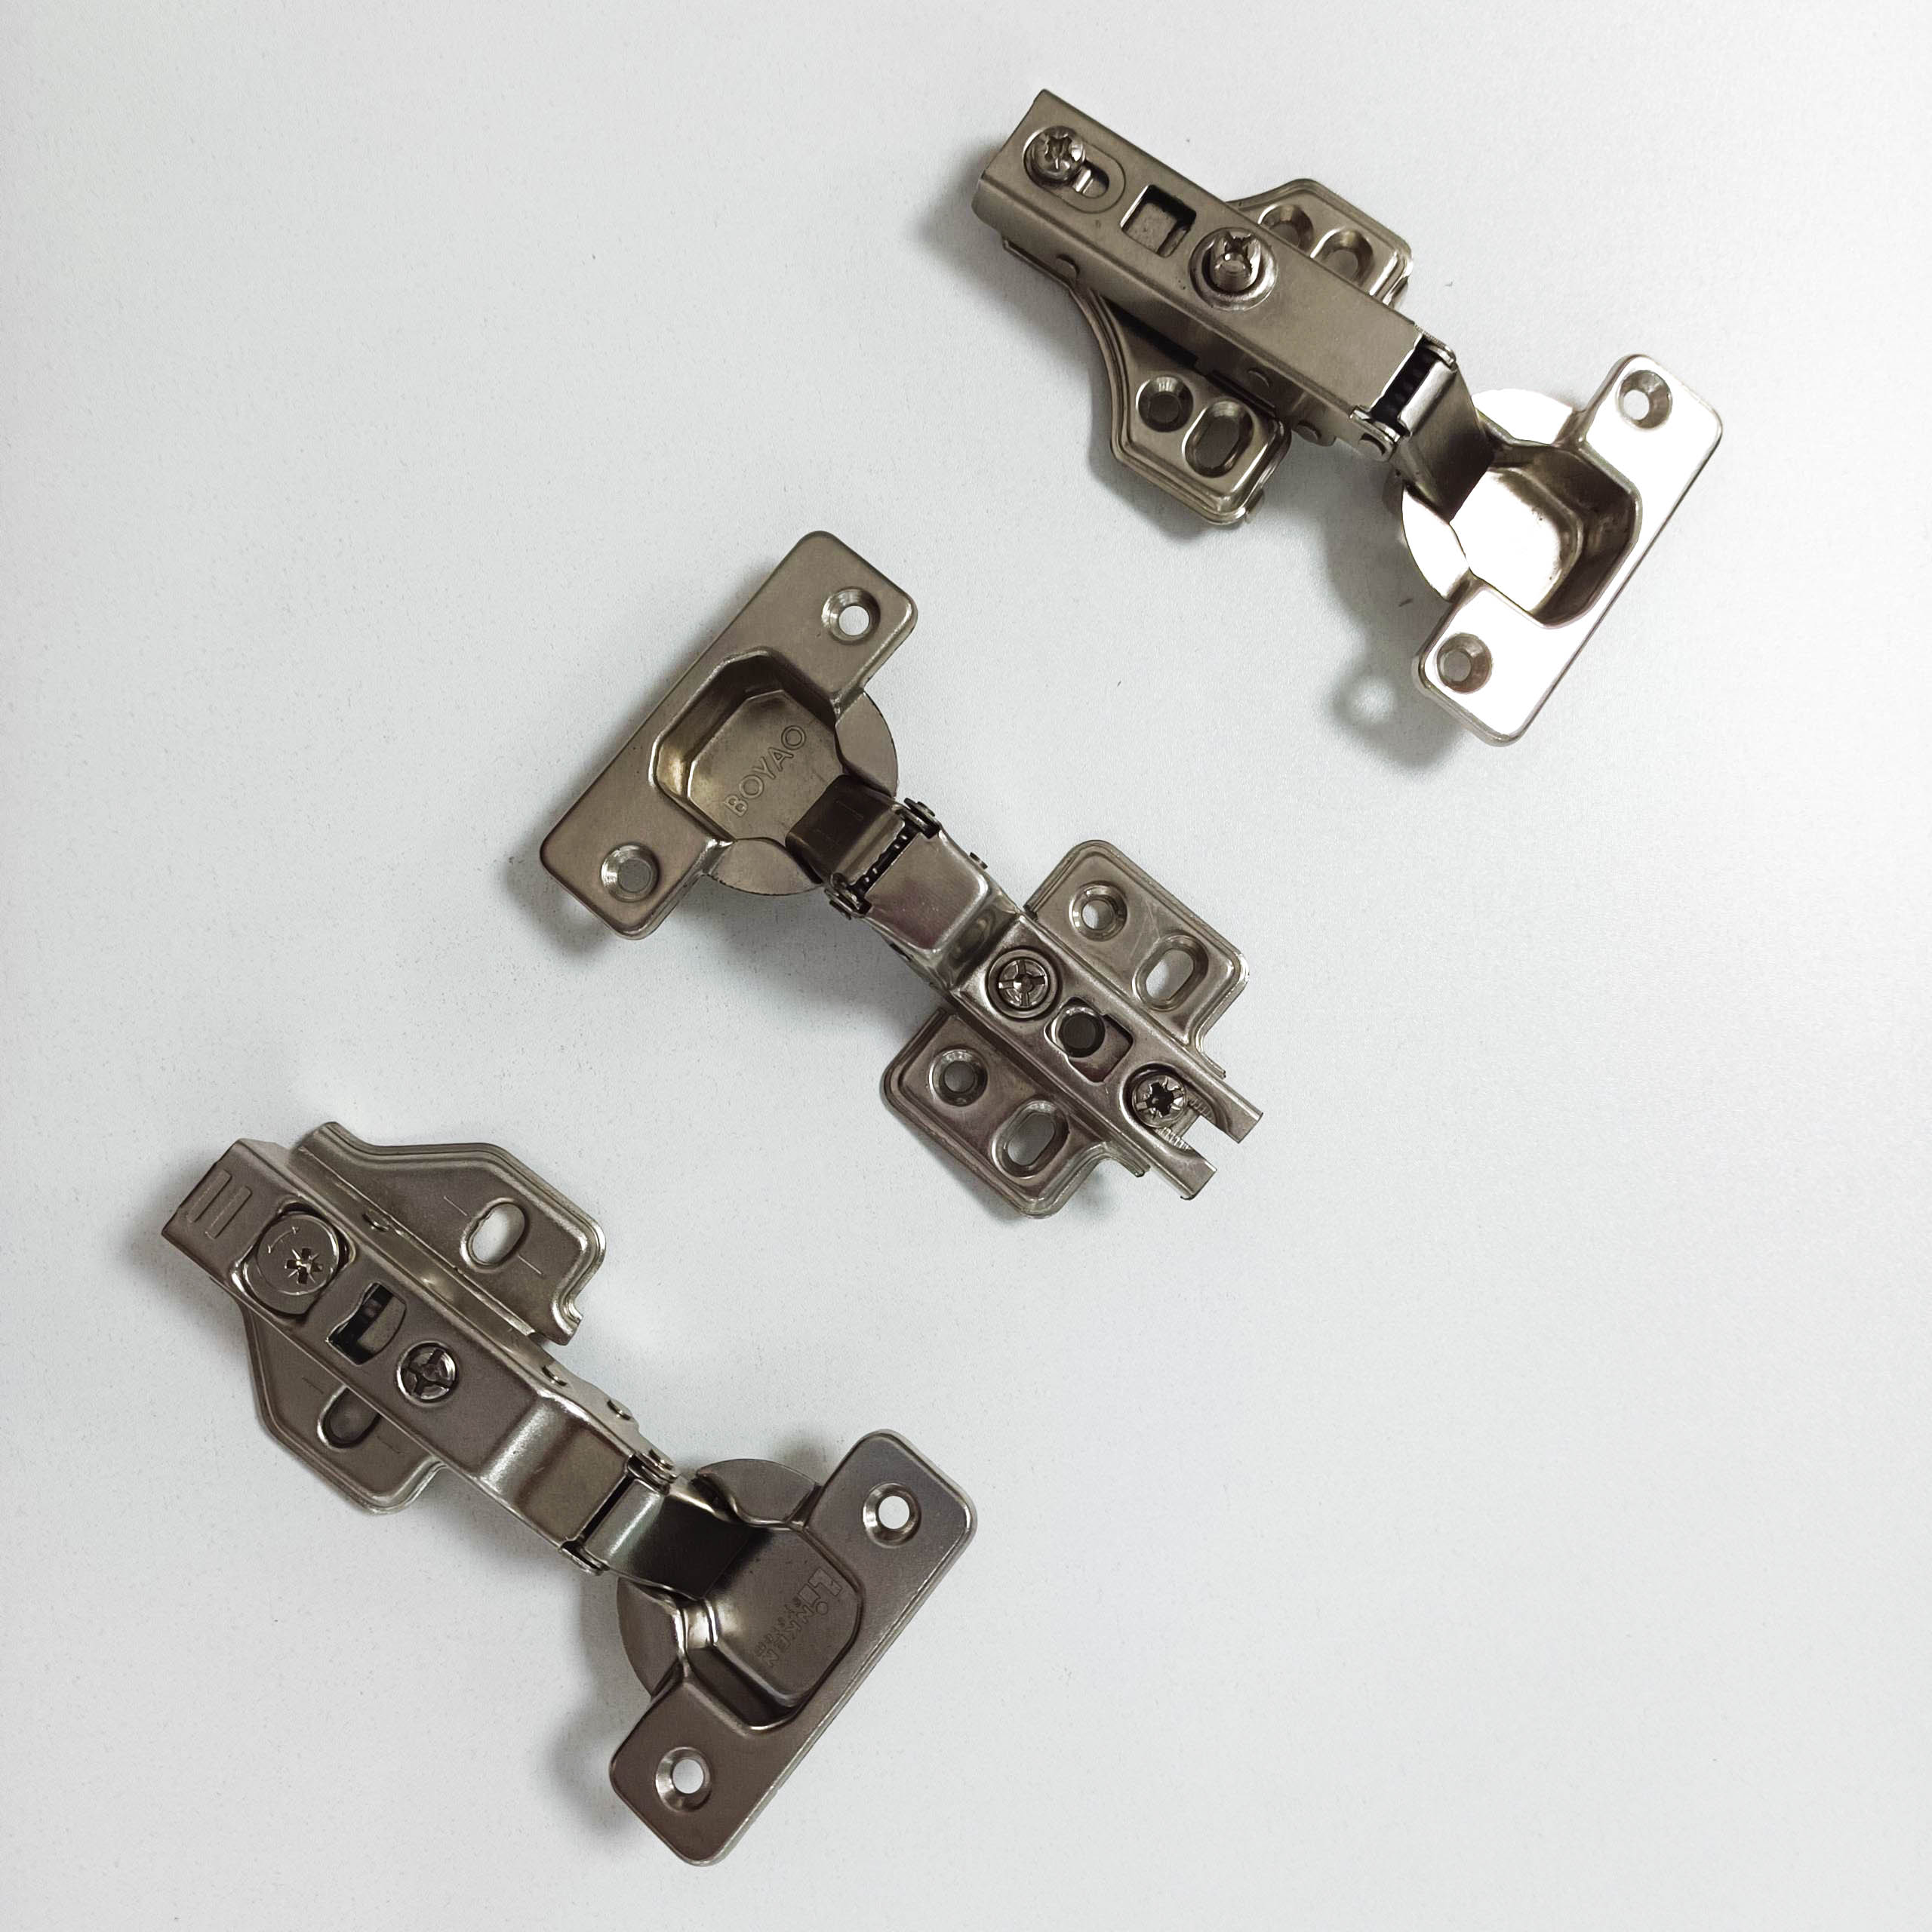  35mm 38mm particle board cabinet hinge